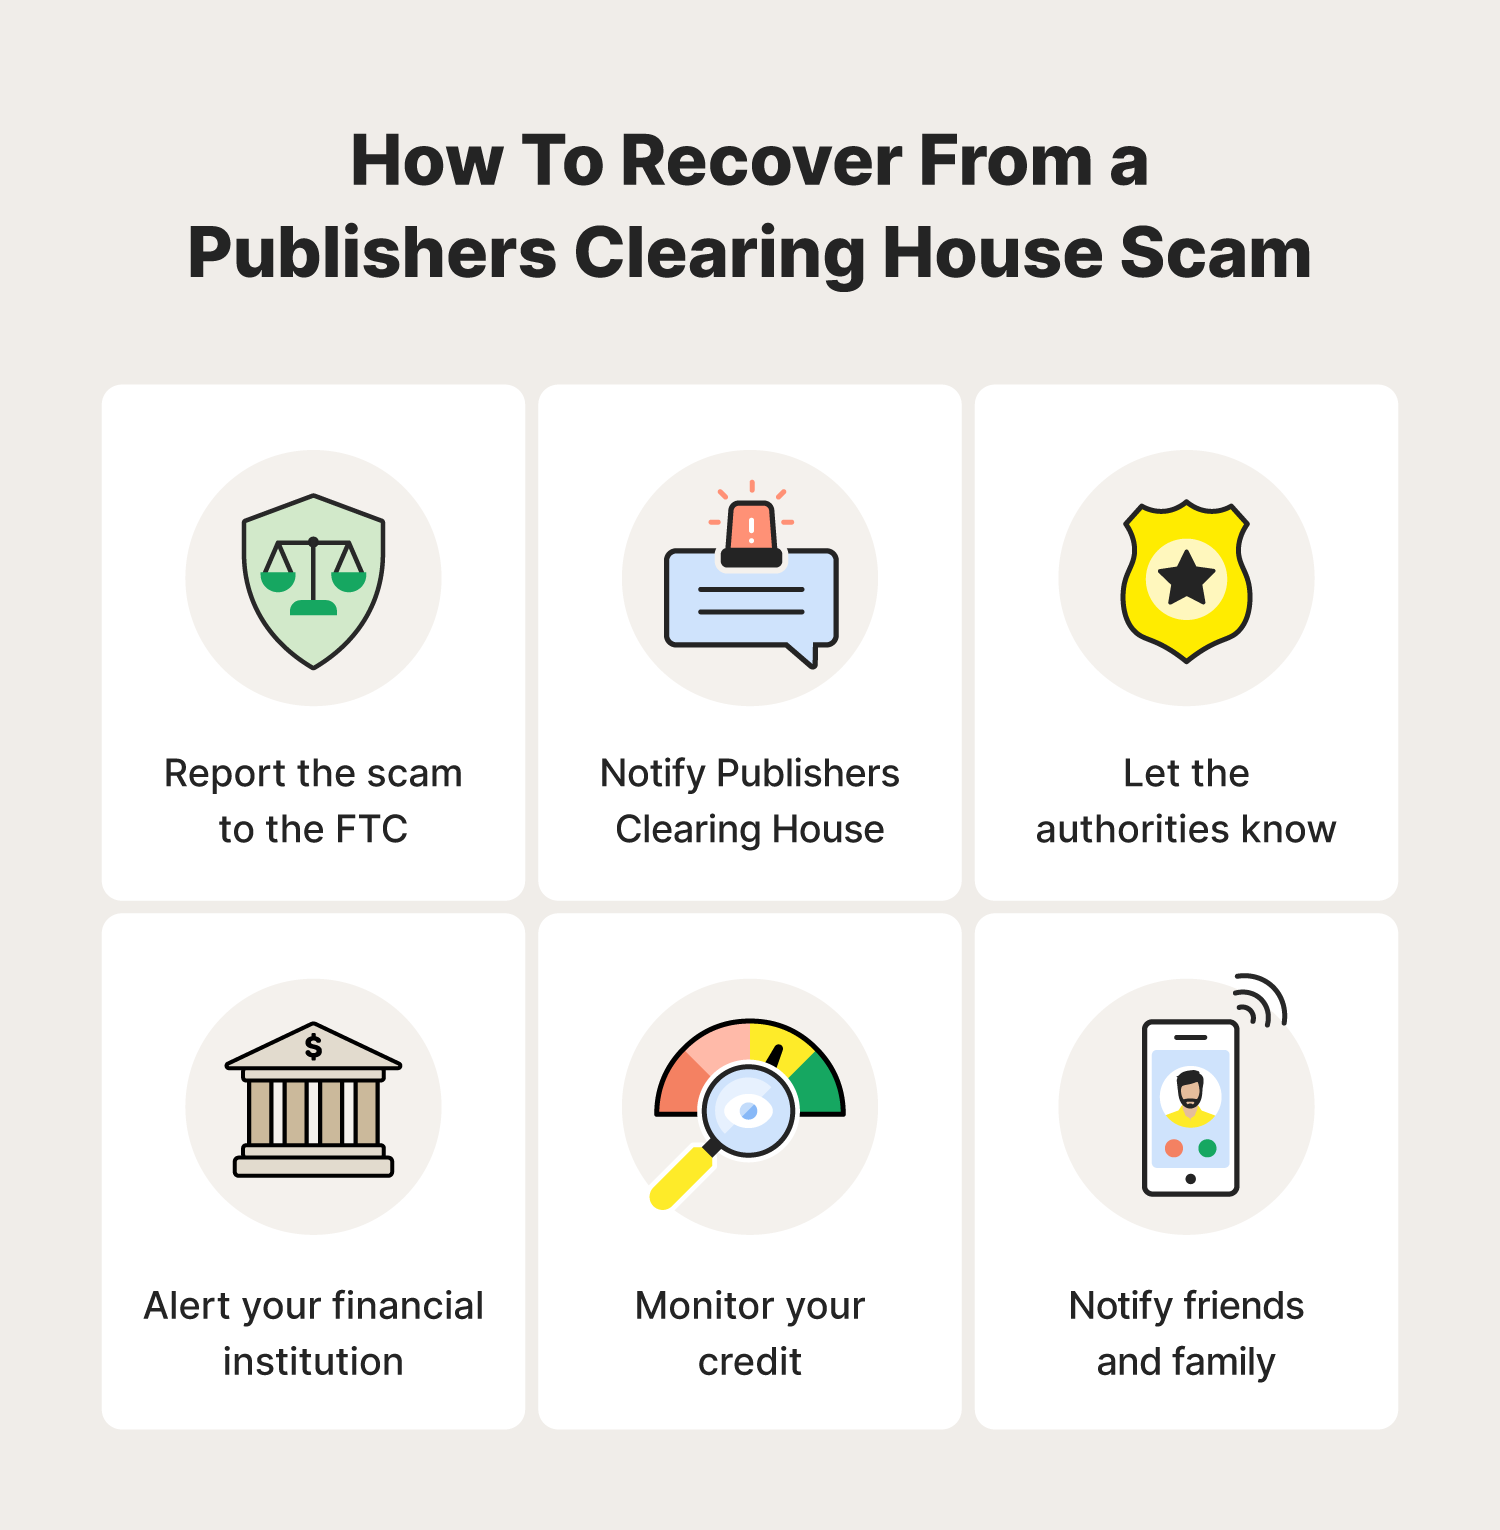 A list of six things you should do to recover from a PCH scam.